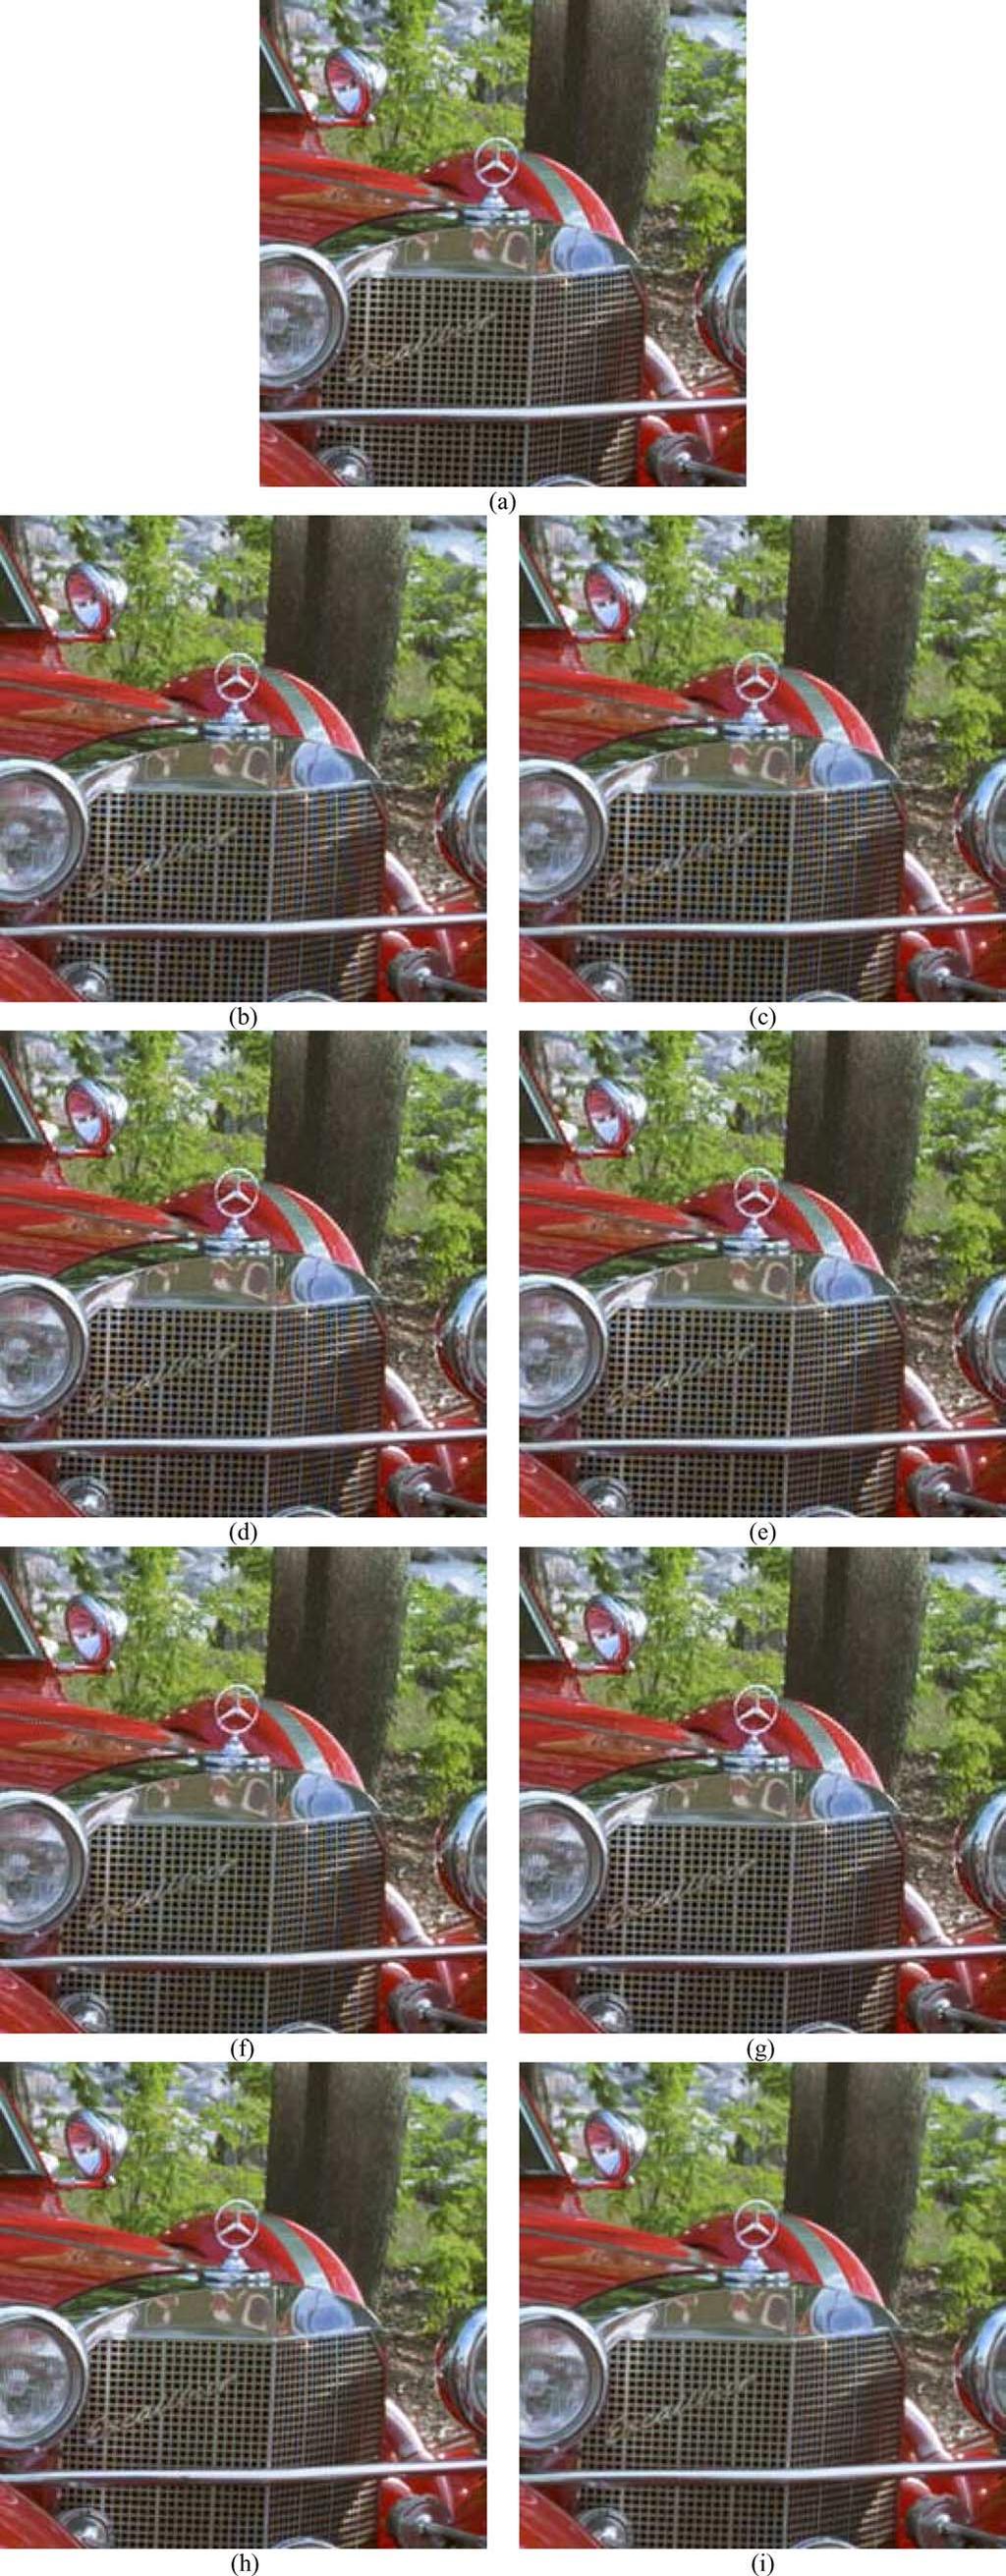 3148 IEEE TRANSACTIONS ON IMAGE PROCESSING, VOL. 15, NO. 10, OCTOBER 2006 B. Experiments on Real Video Clips Fig. 13.